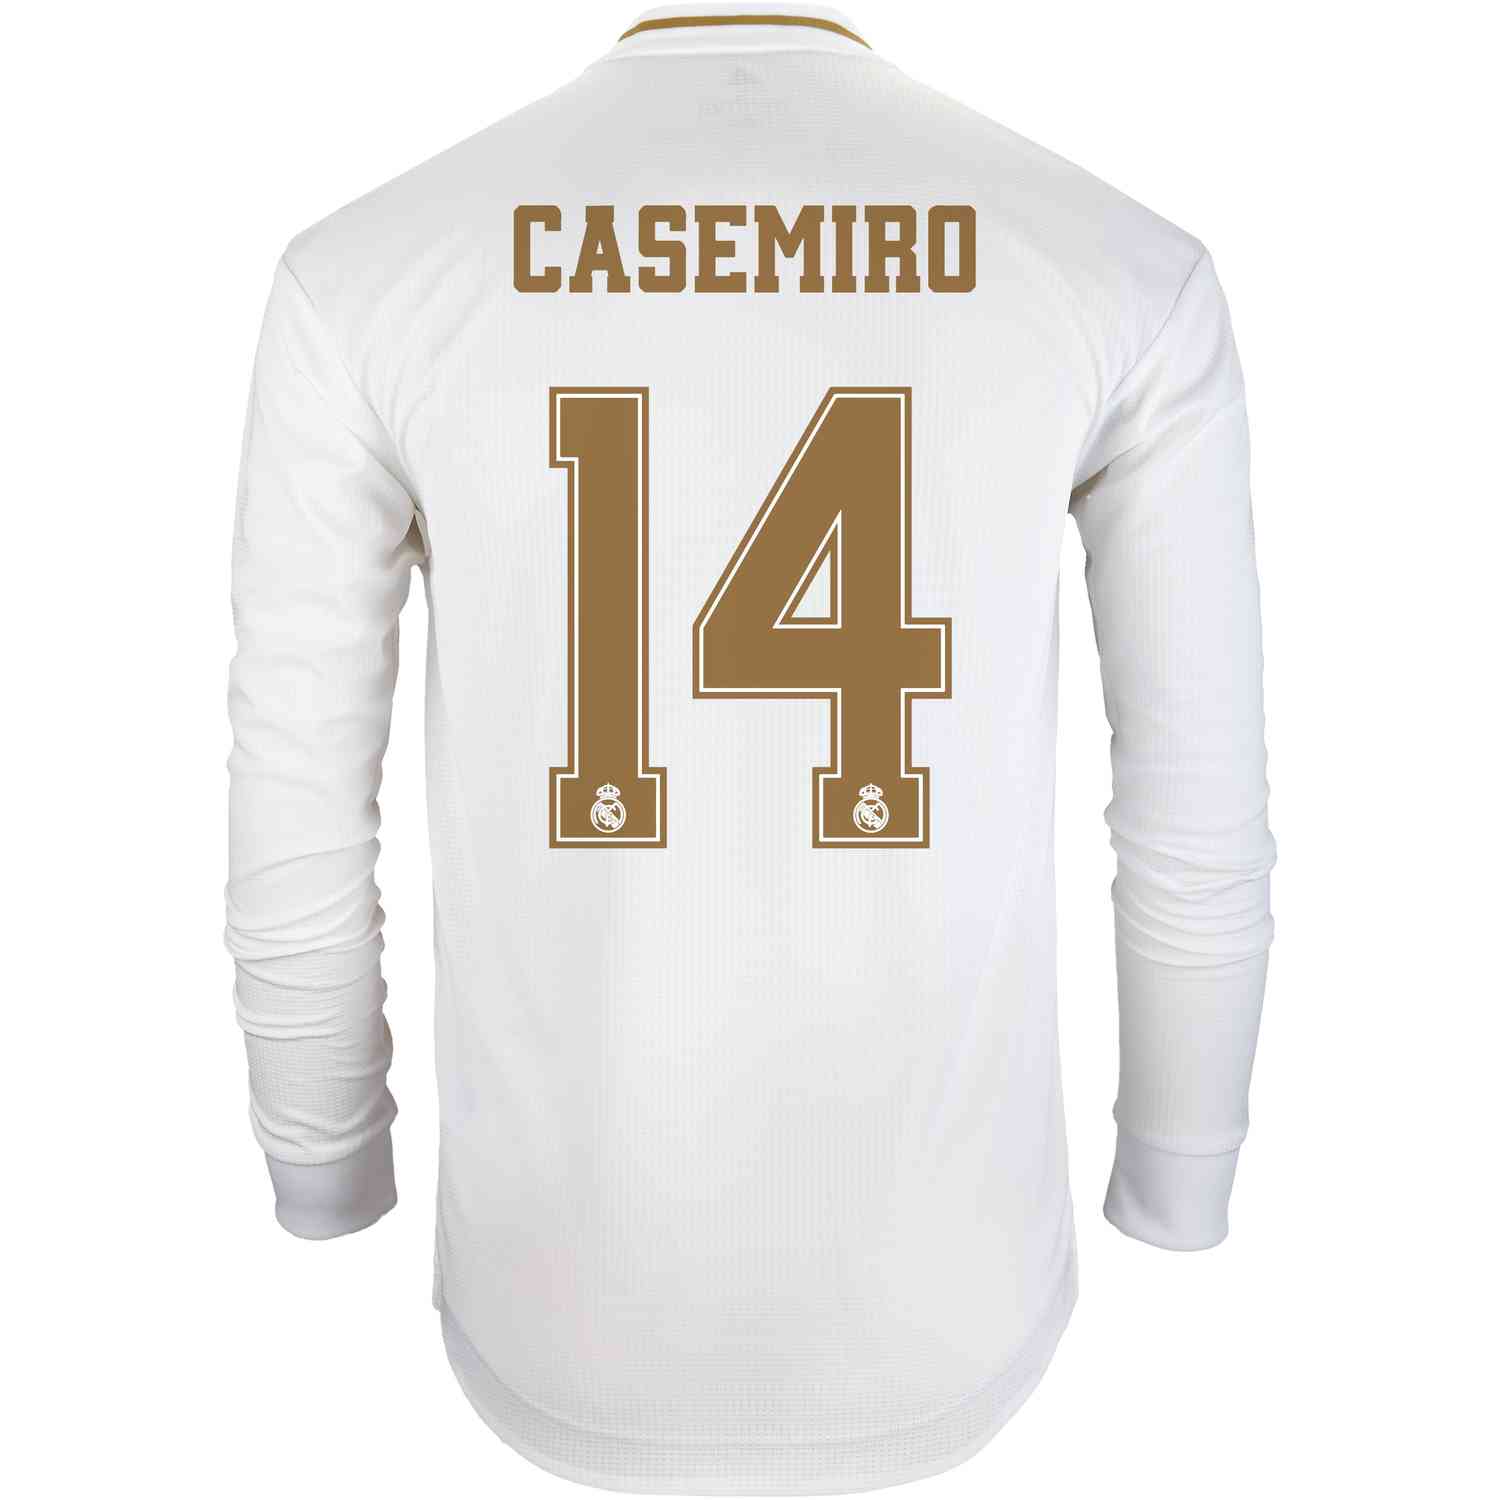 2019/20 adidas Casemiro Real Madrid Home L/S Authentic Jersey - SoccerPro